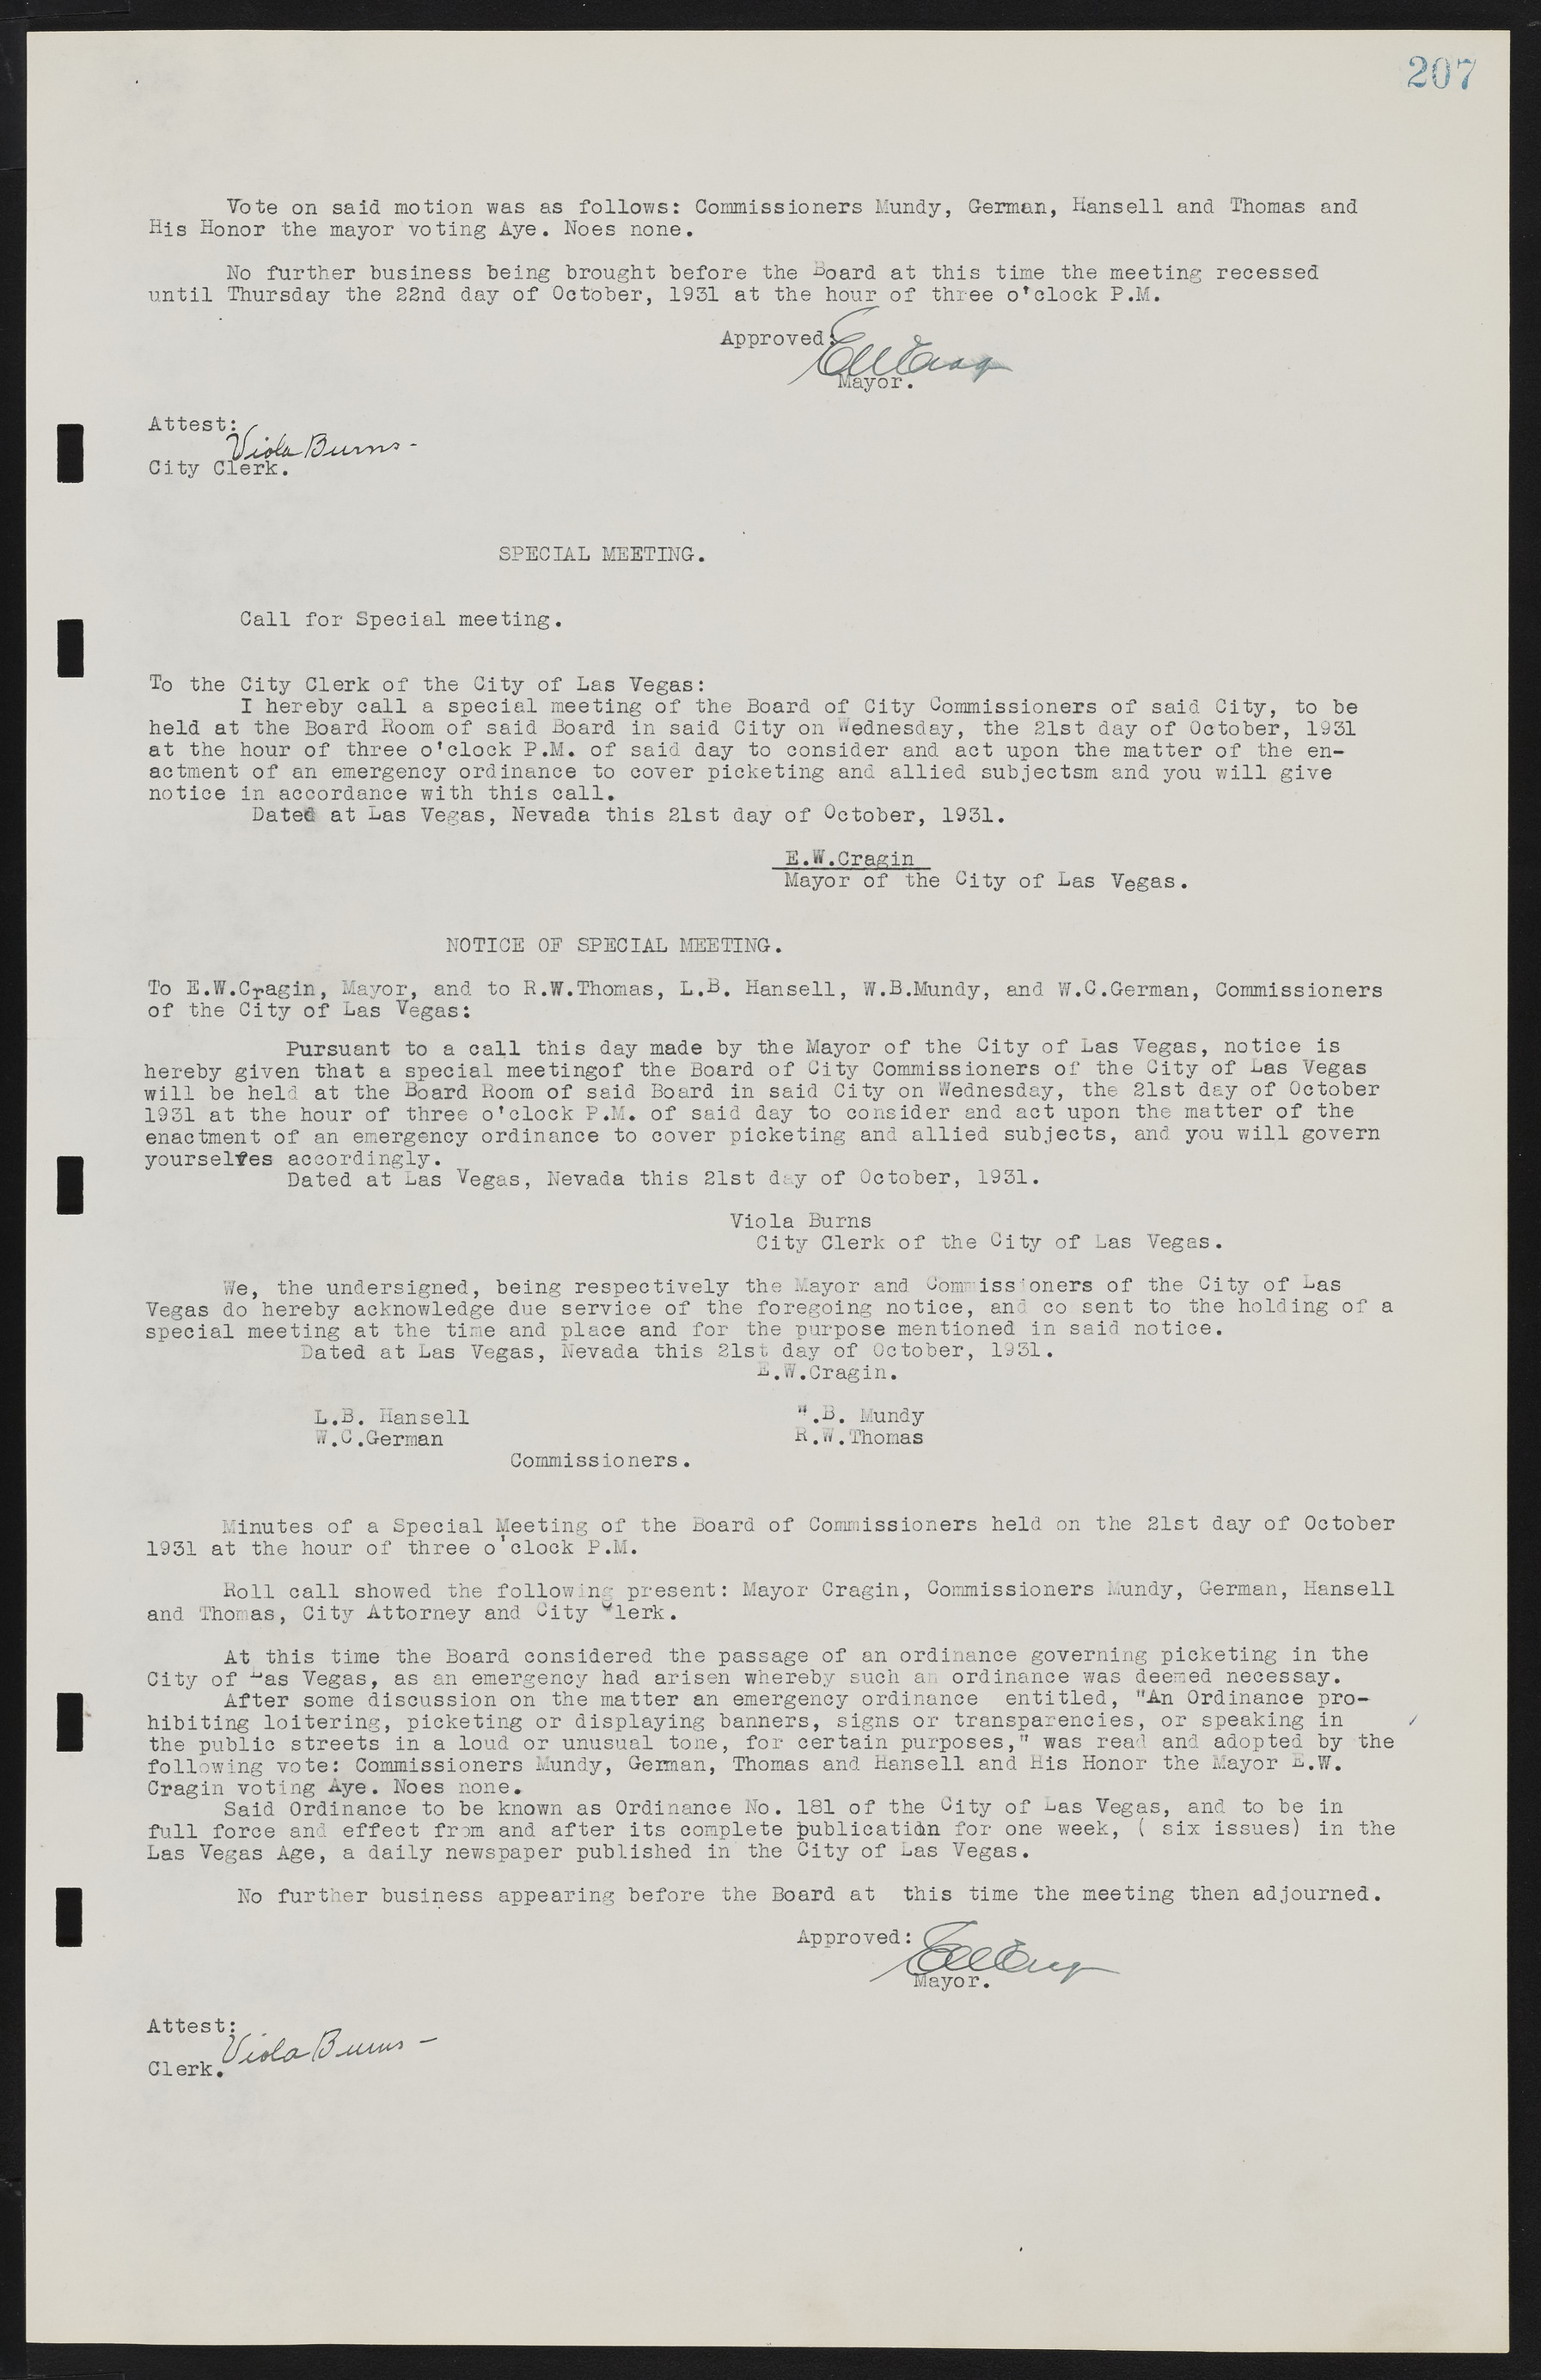 Las Vegas City Commission Minutes, May 14, 1929 to February 11, 1937, lvc000003-213